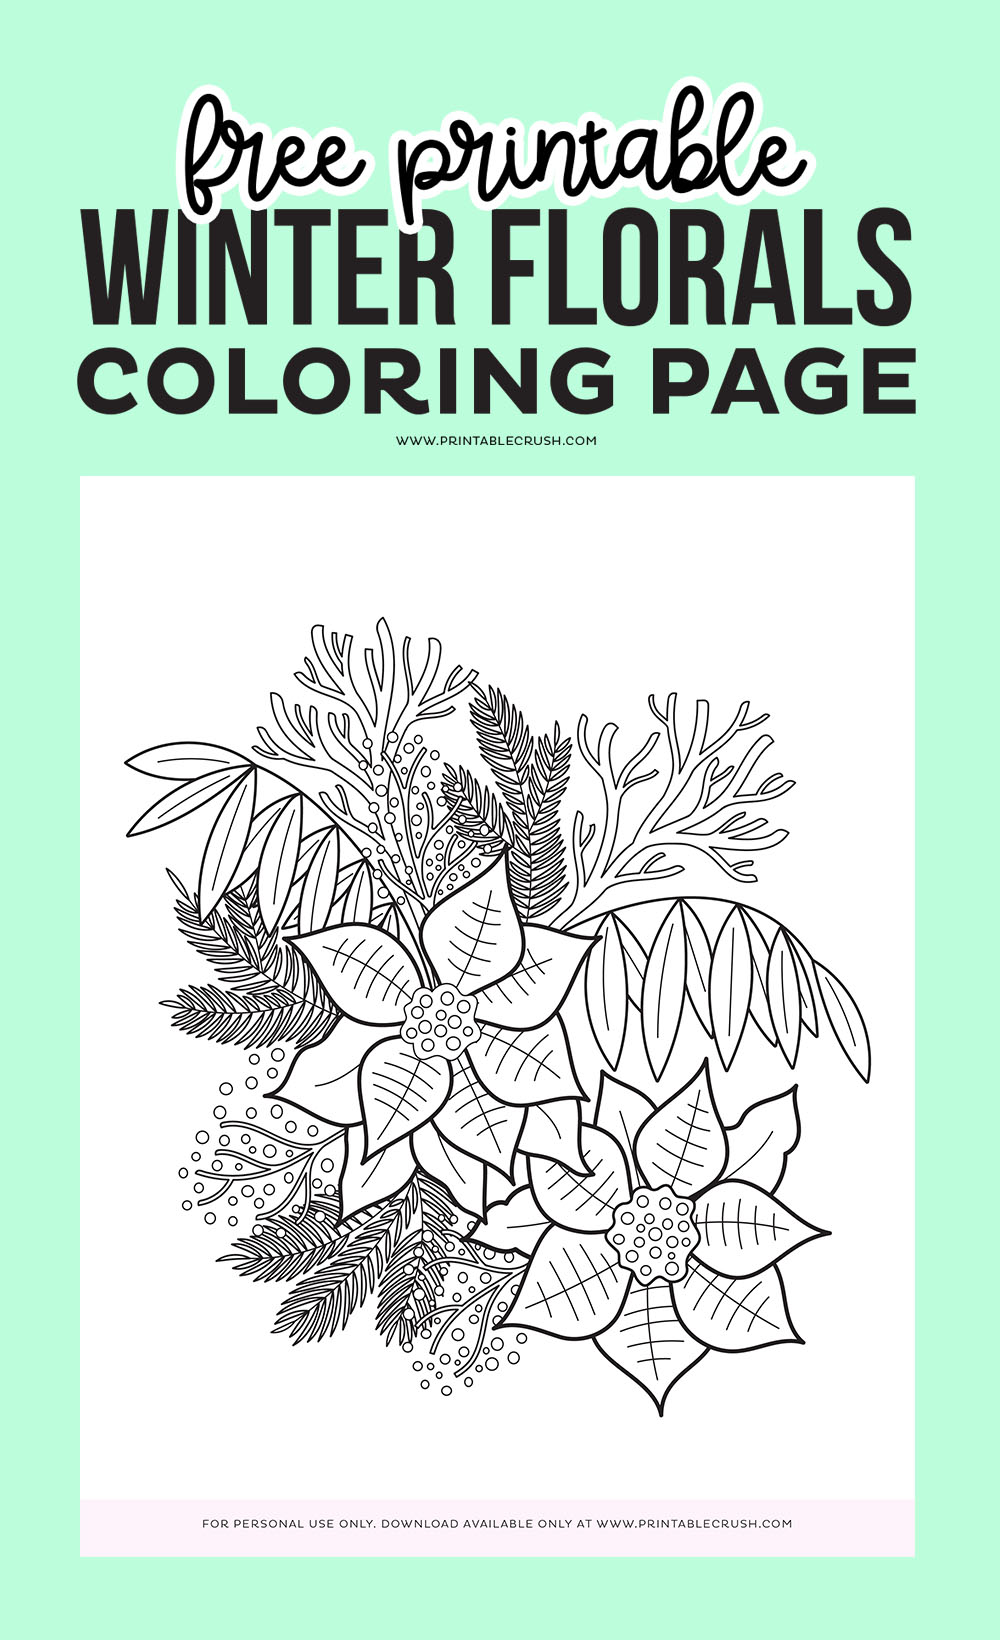 Free winter florals coloring page printable